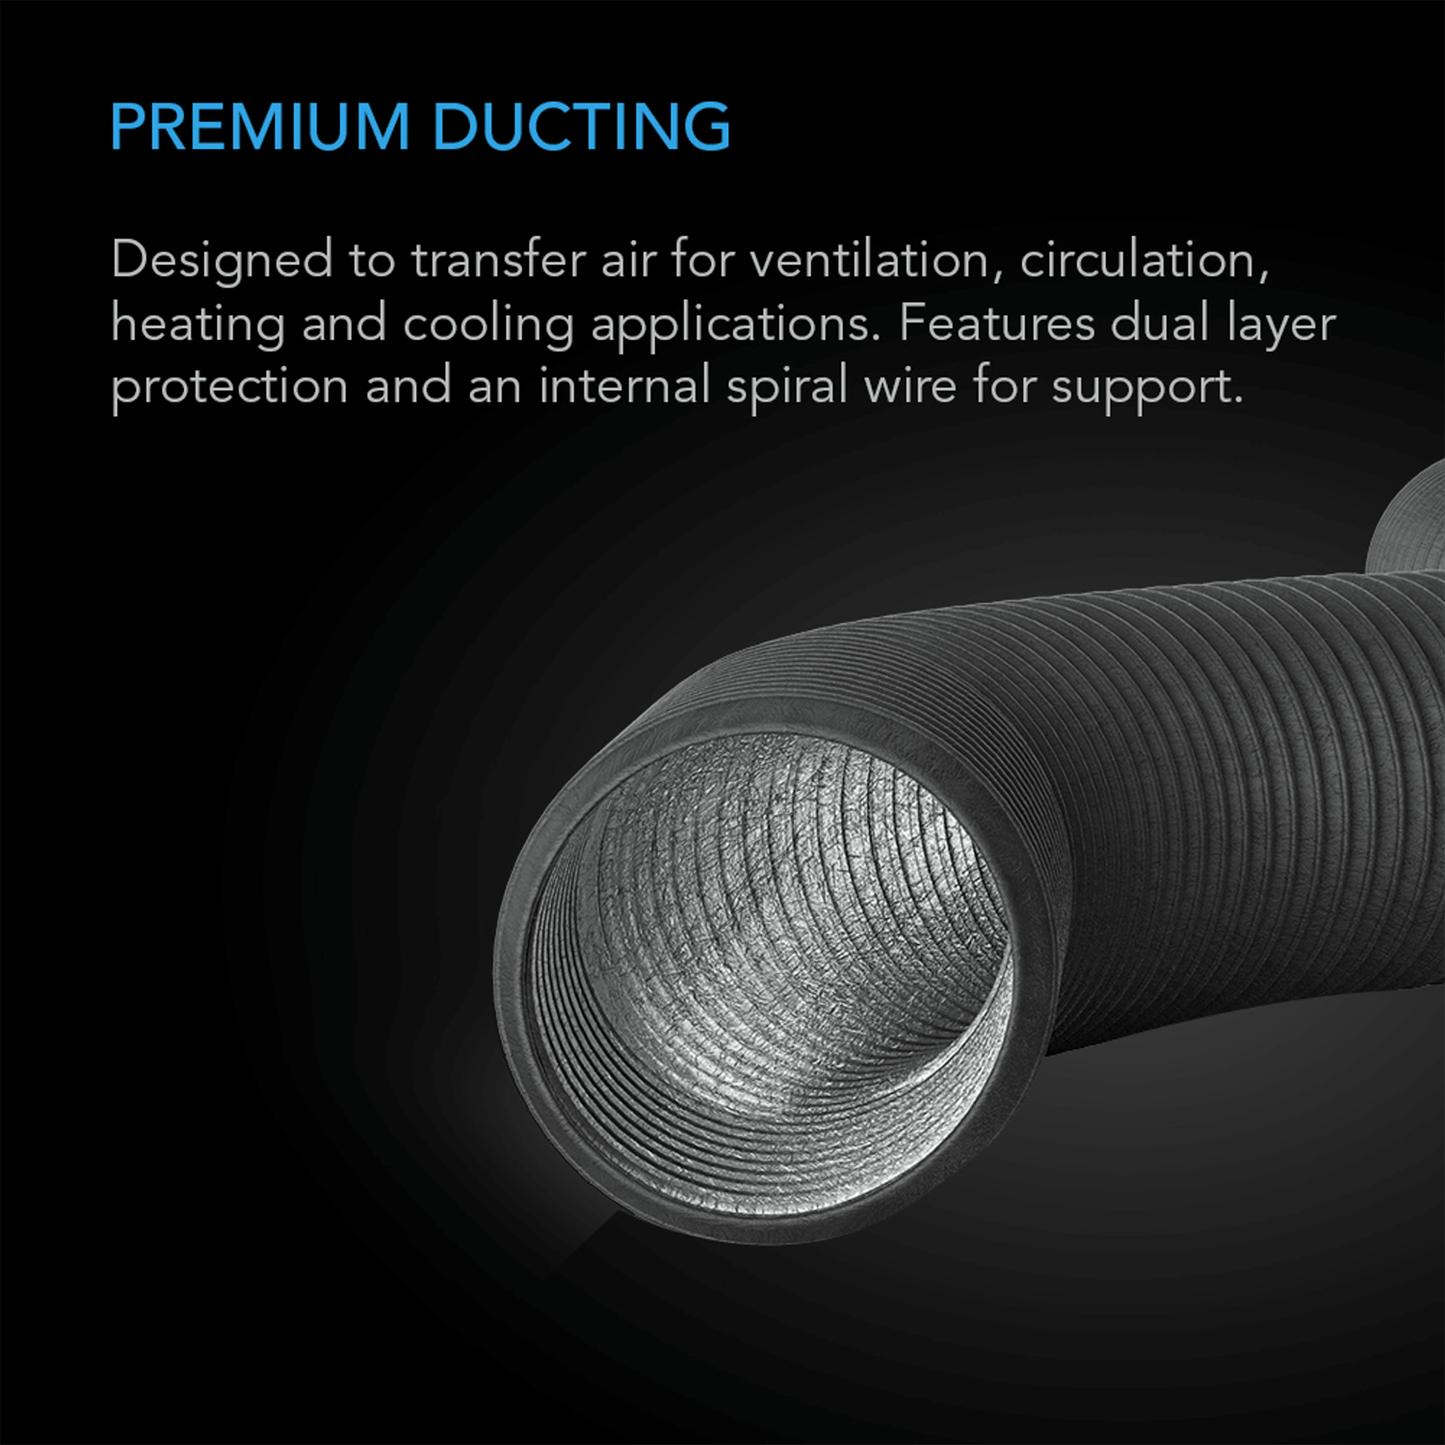 AC Infinity Flexible Four-Layer Ducting, 8-FT Long, 4-Inch | AI-DTA4-8 | Grow Tents Depot | Climate Control | 819137021020